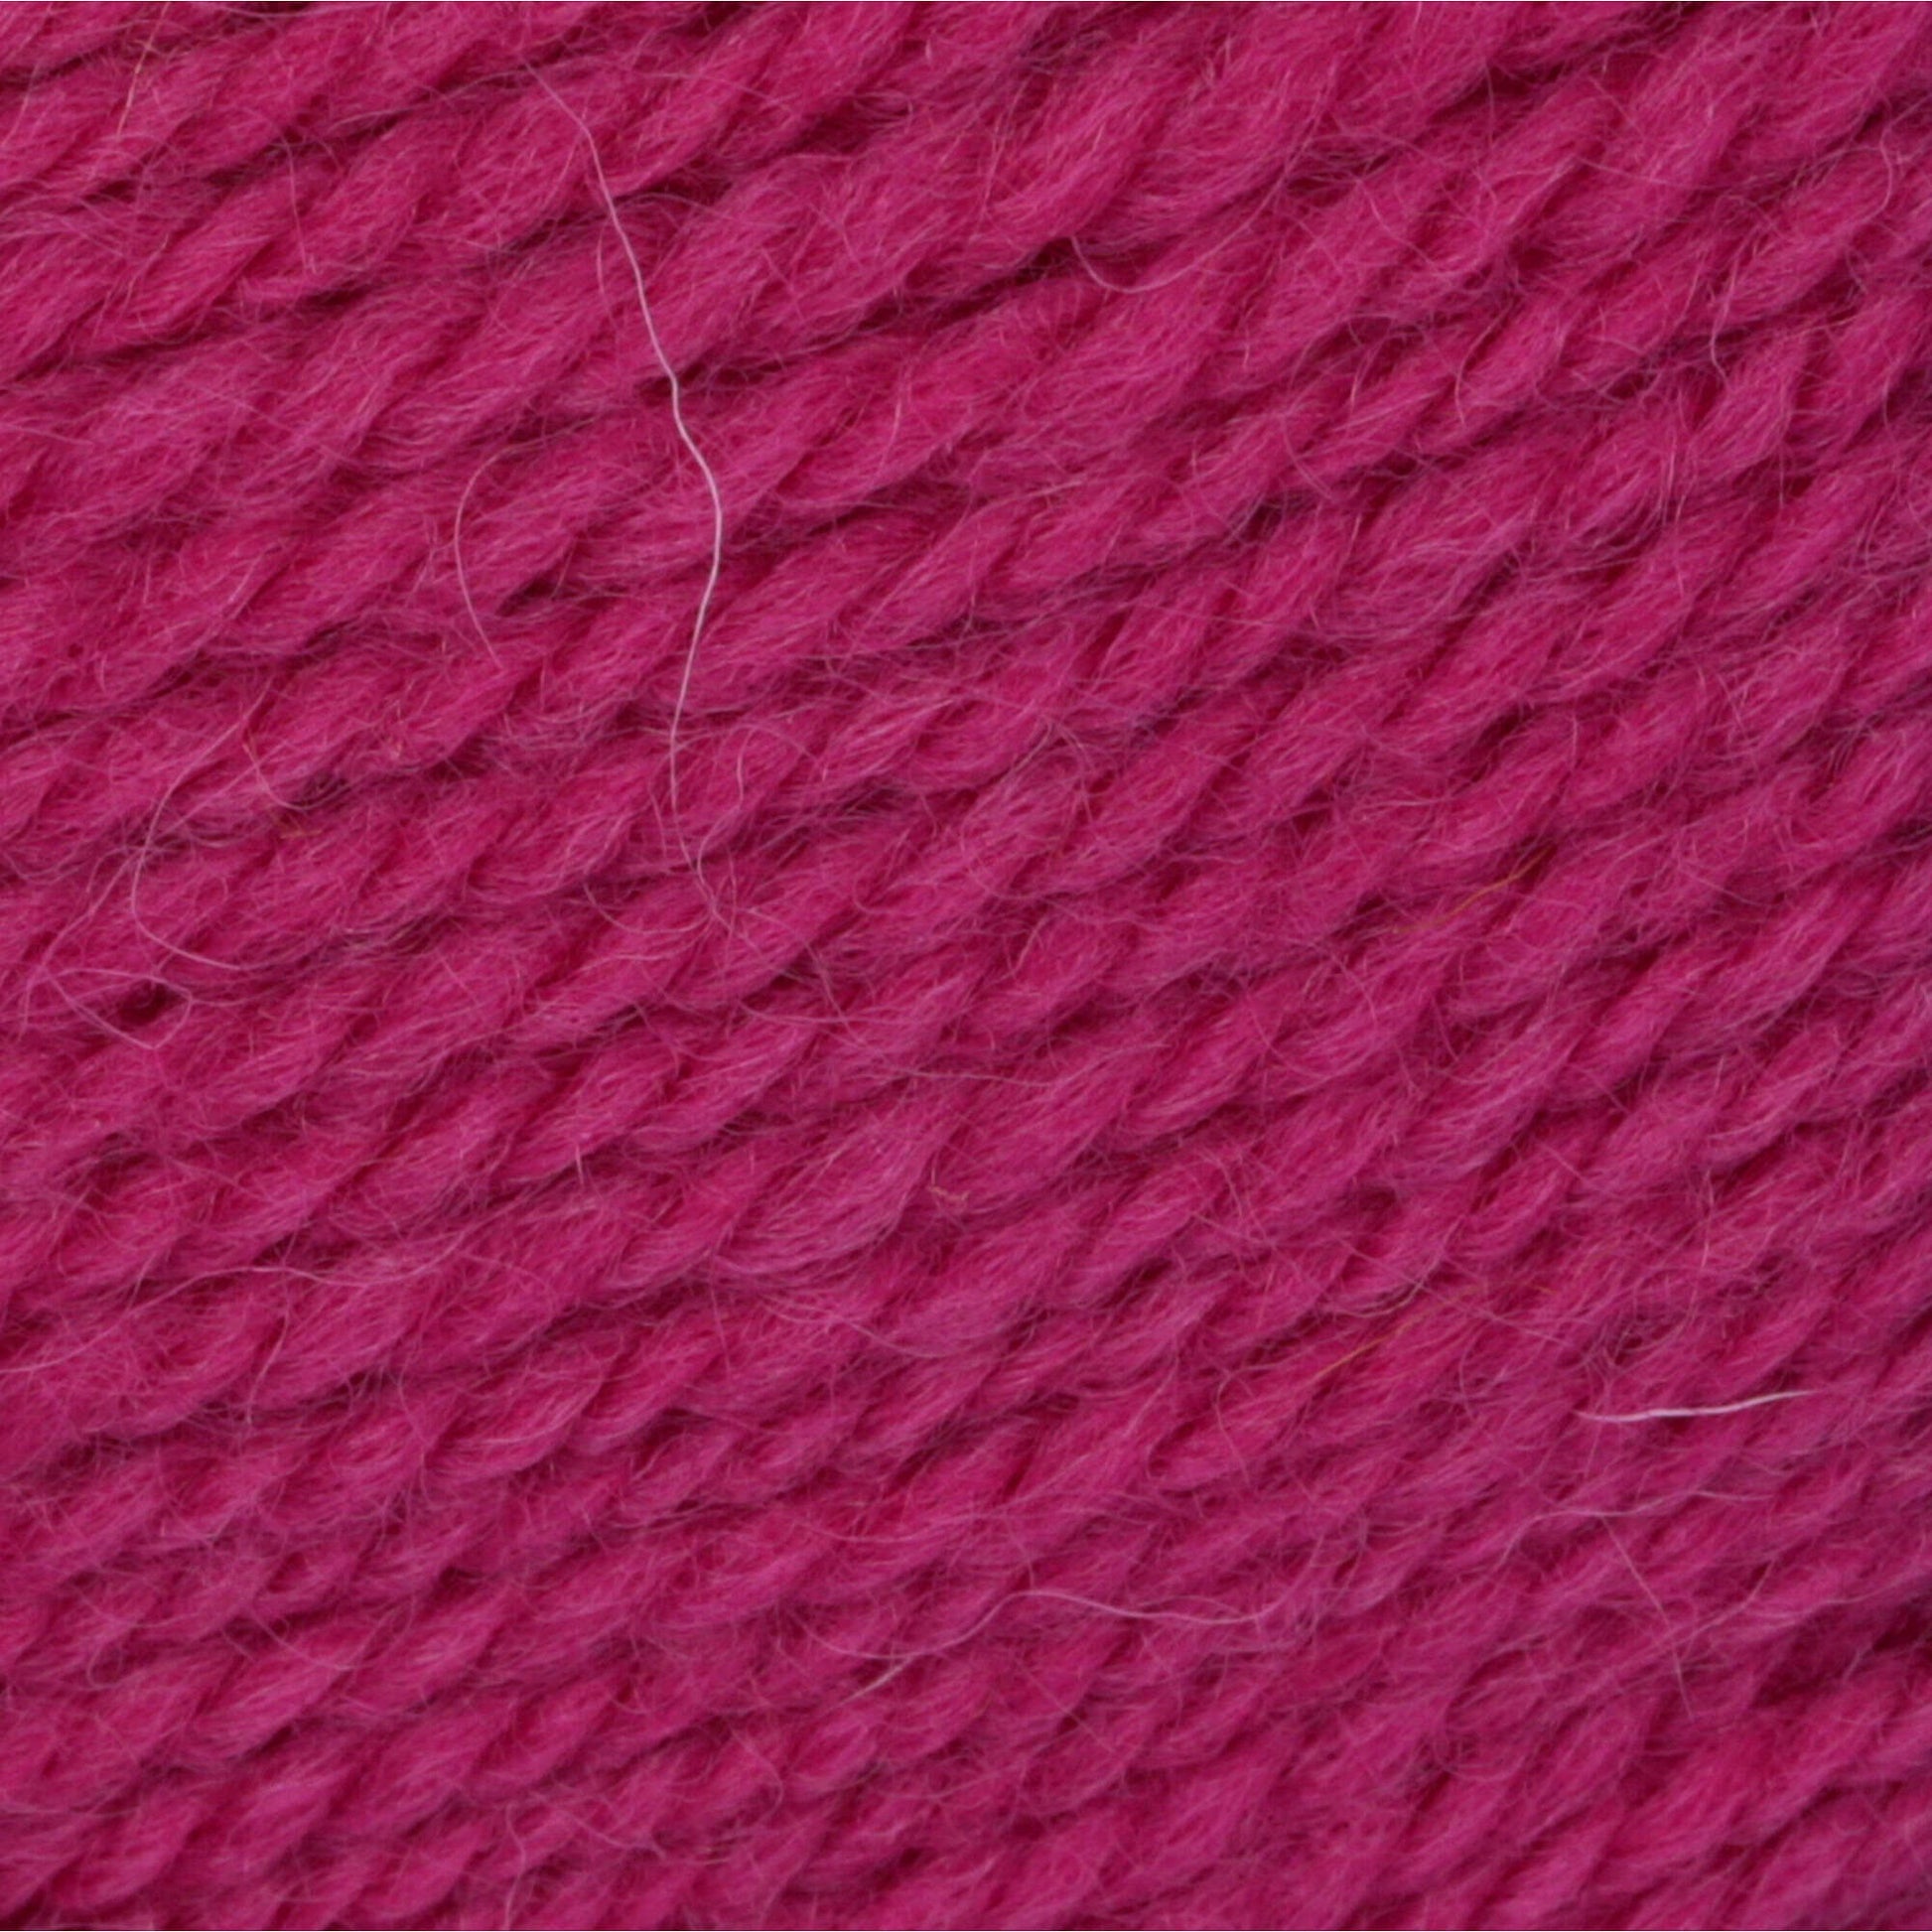 Patons Classic Wool Worsted Yarn - Discontinued Shades Orchid